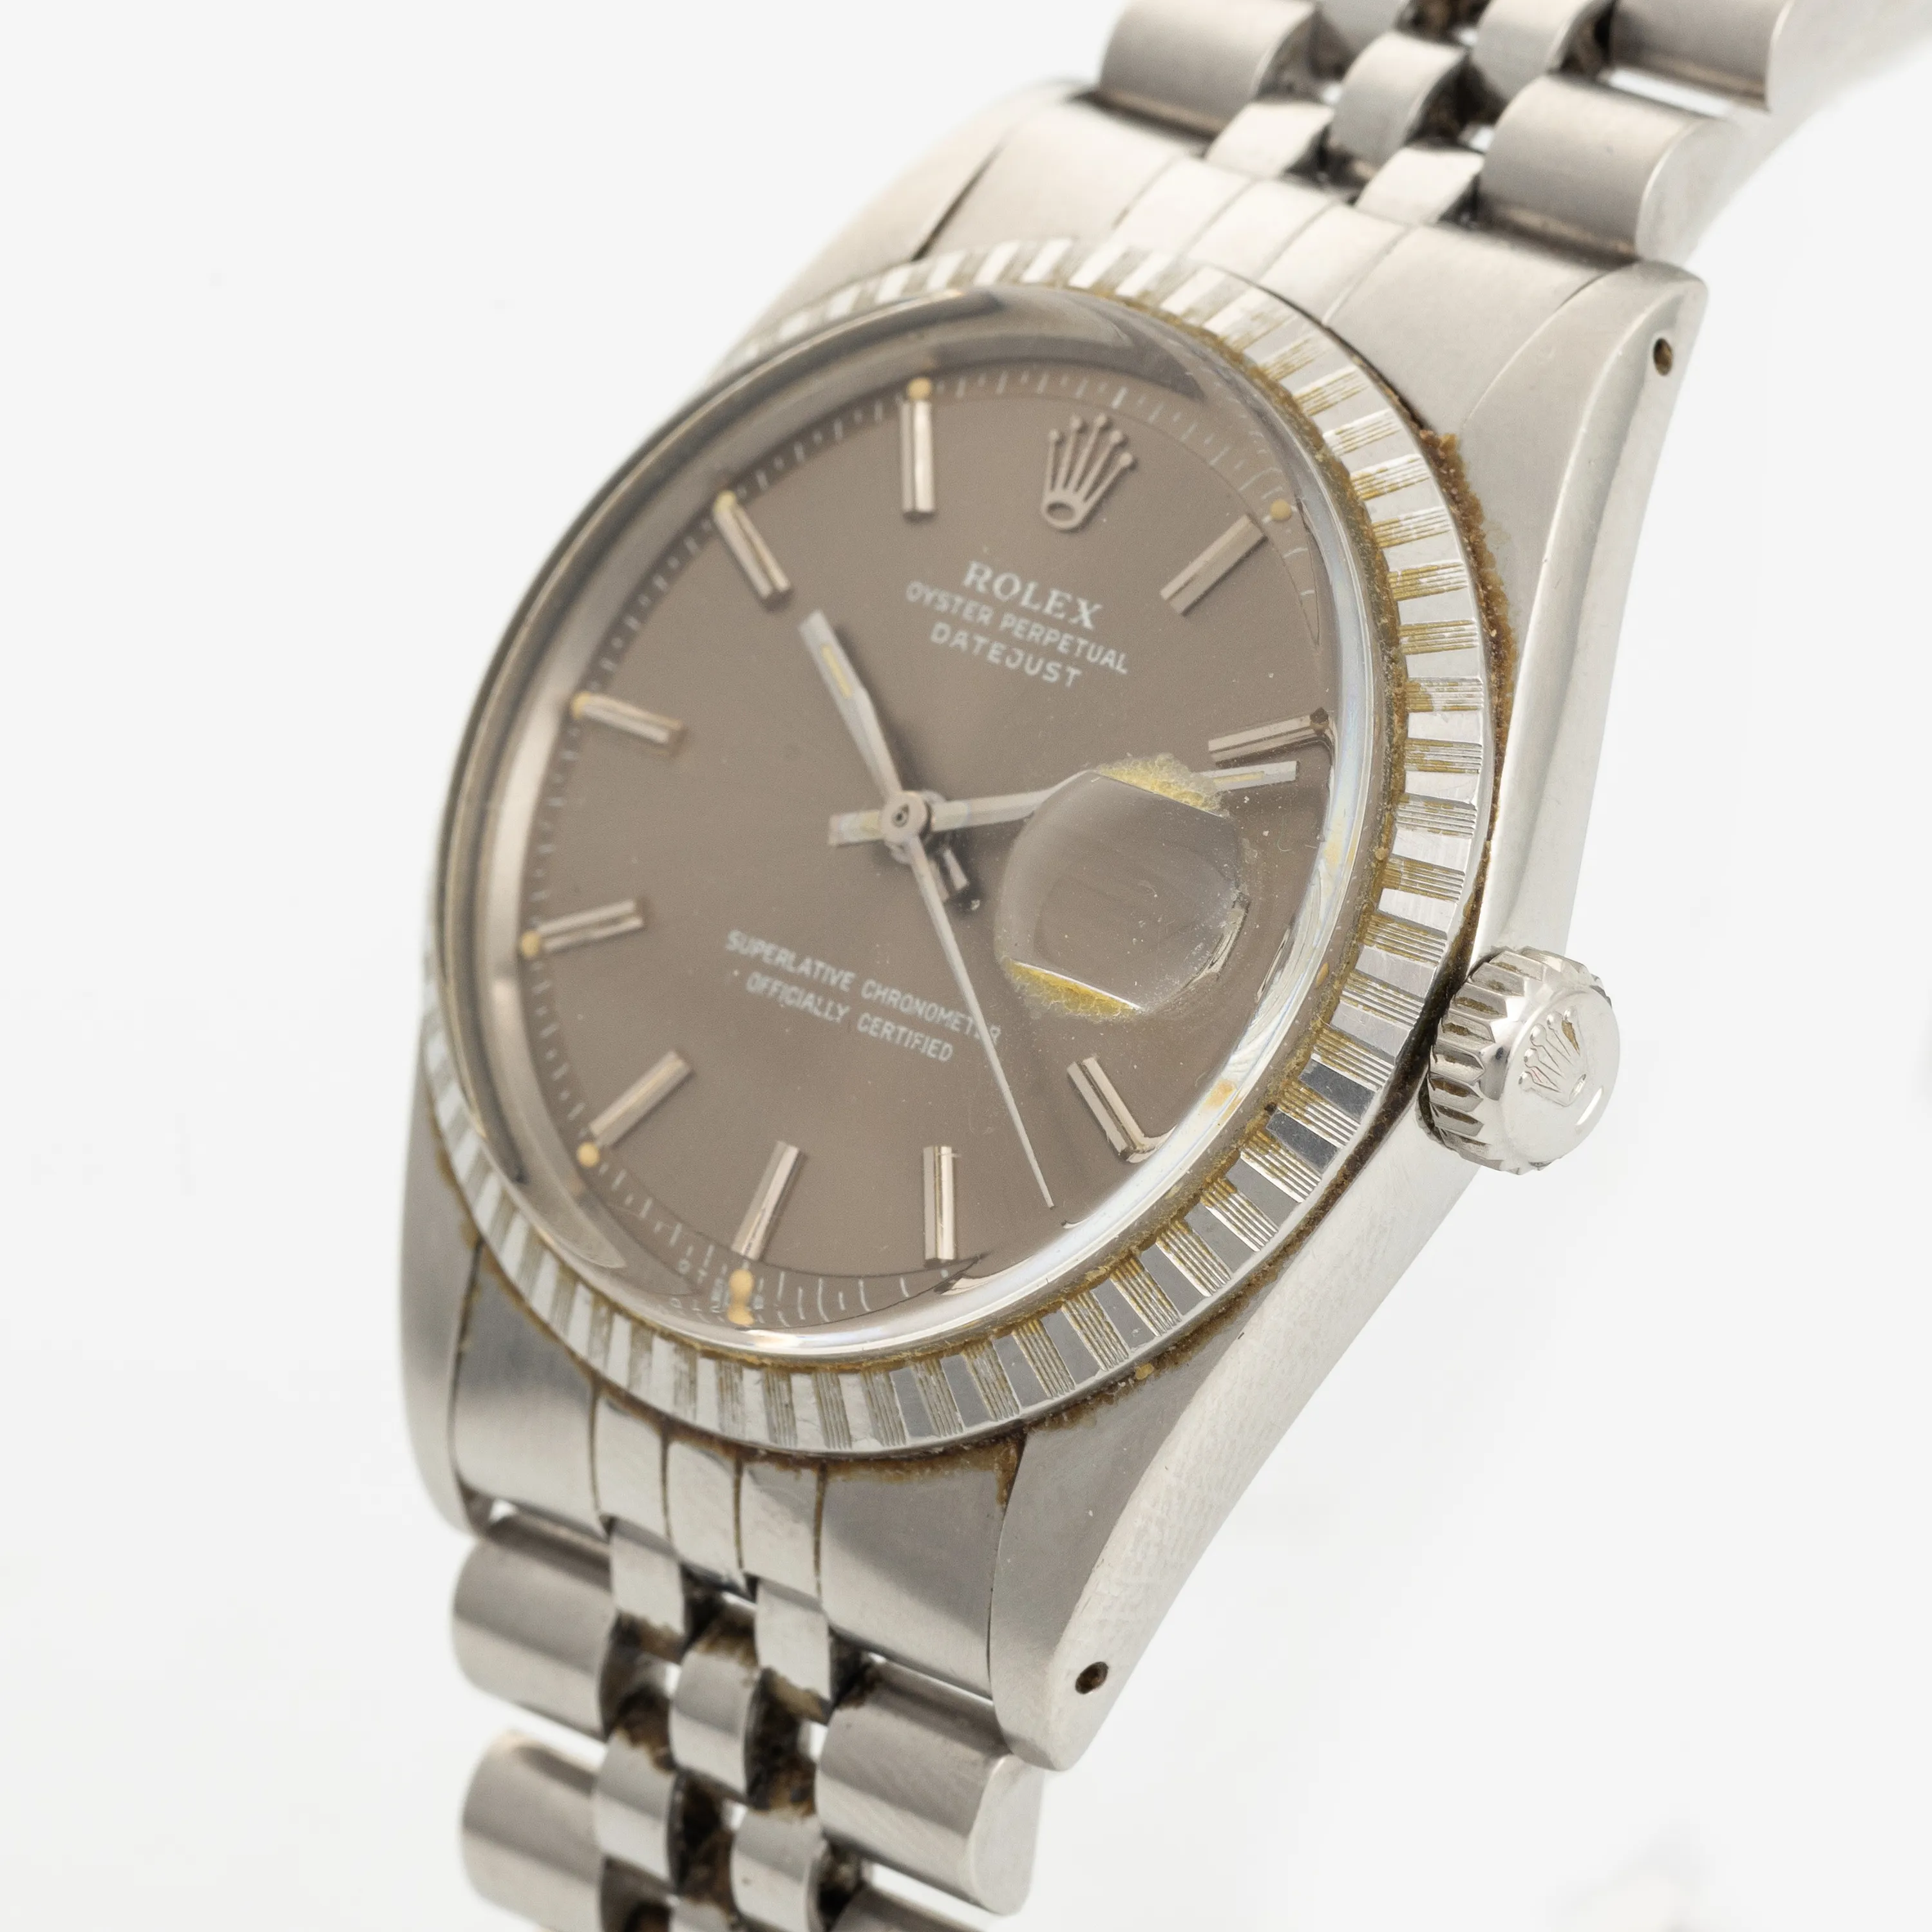 Rolex Datejust 1603 36mm Stainless steel Gray 1